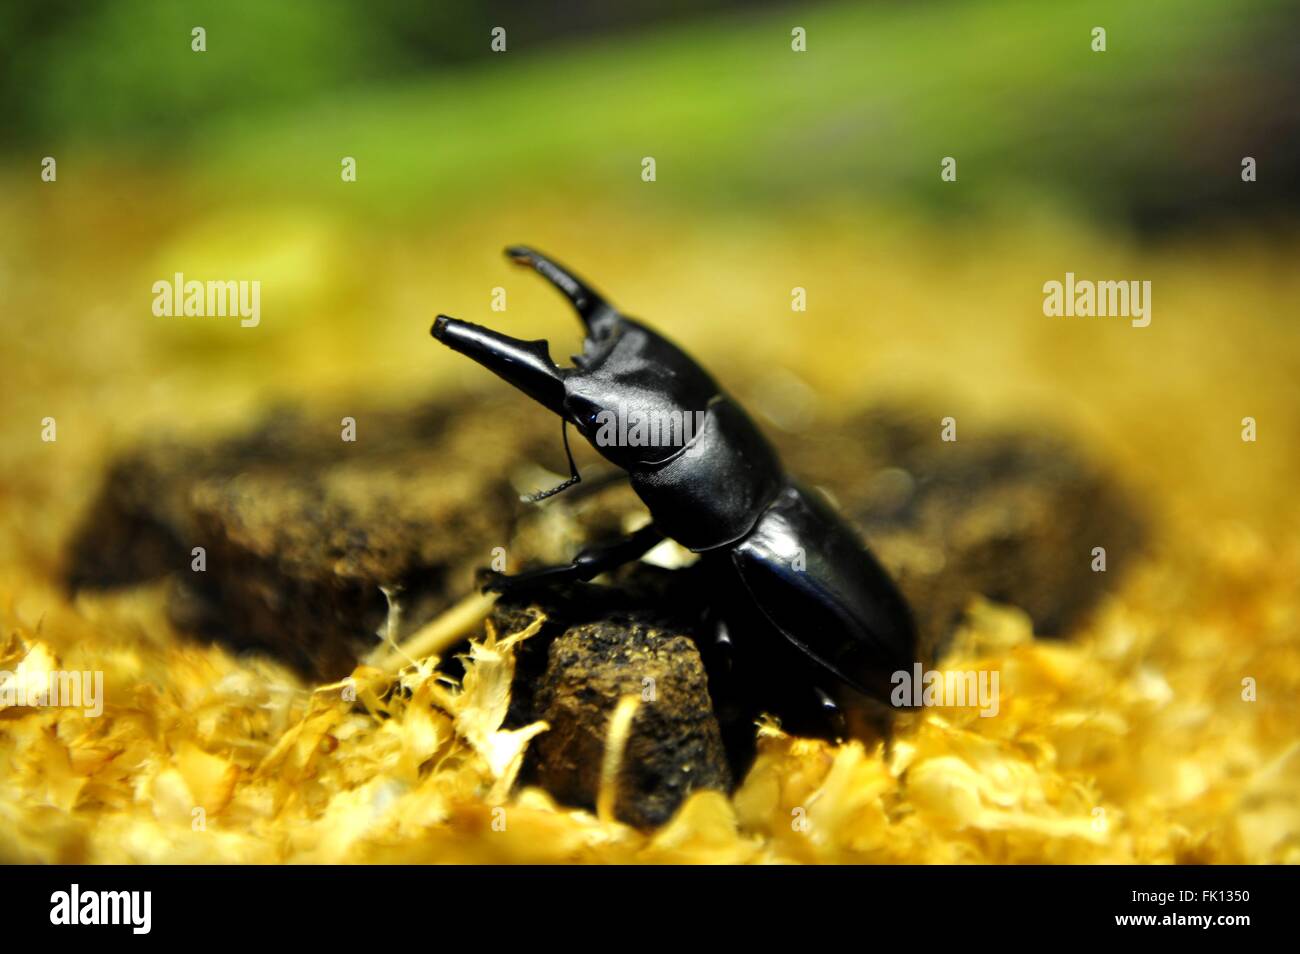 Shanghai. 5th Mar, 2016. Photo taken on March 5, 2016 shows a flat stag beetle at the Shanghai Natural Wild Insect Kingdom in Shanghai, east China. Saturday marks the day of 'Jingzhe', literally meaning the awakening of insects, which is the third one of the 24 solar terms on Chinese Lunar Calendar. © Zhang Jiansong/Xinhua/Alamy Live News Stock Photo